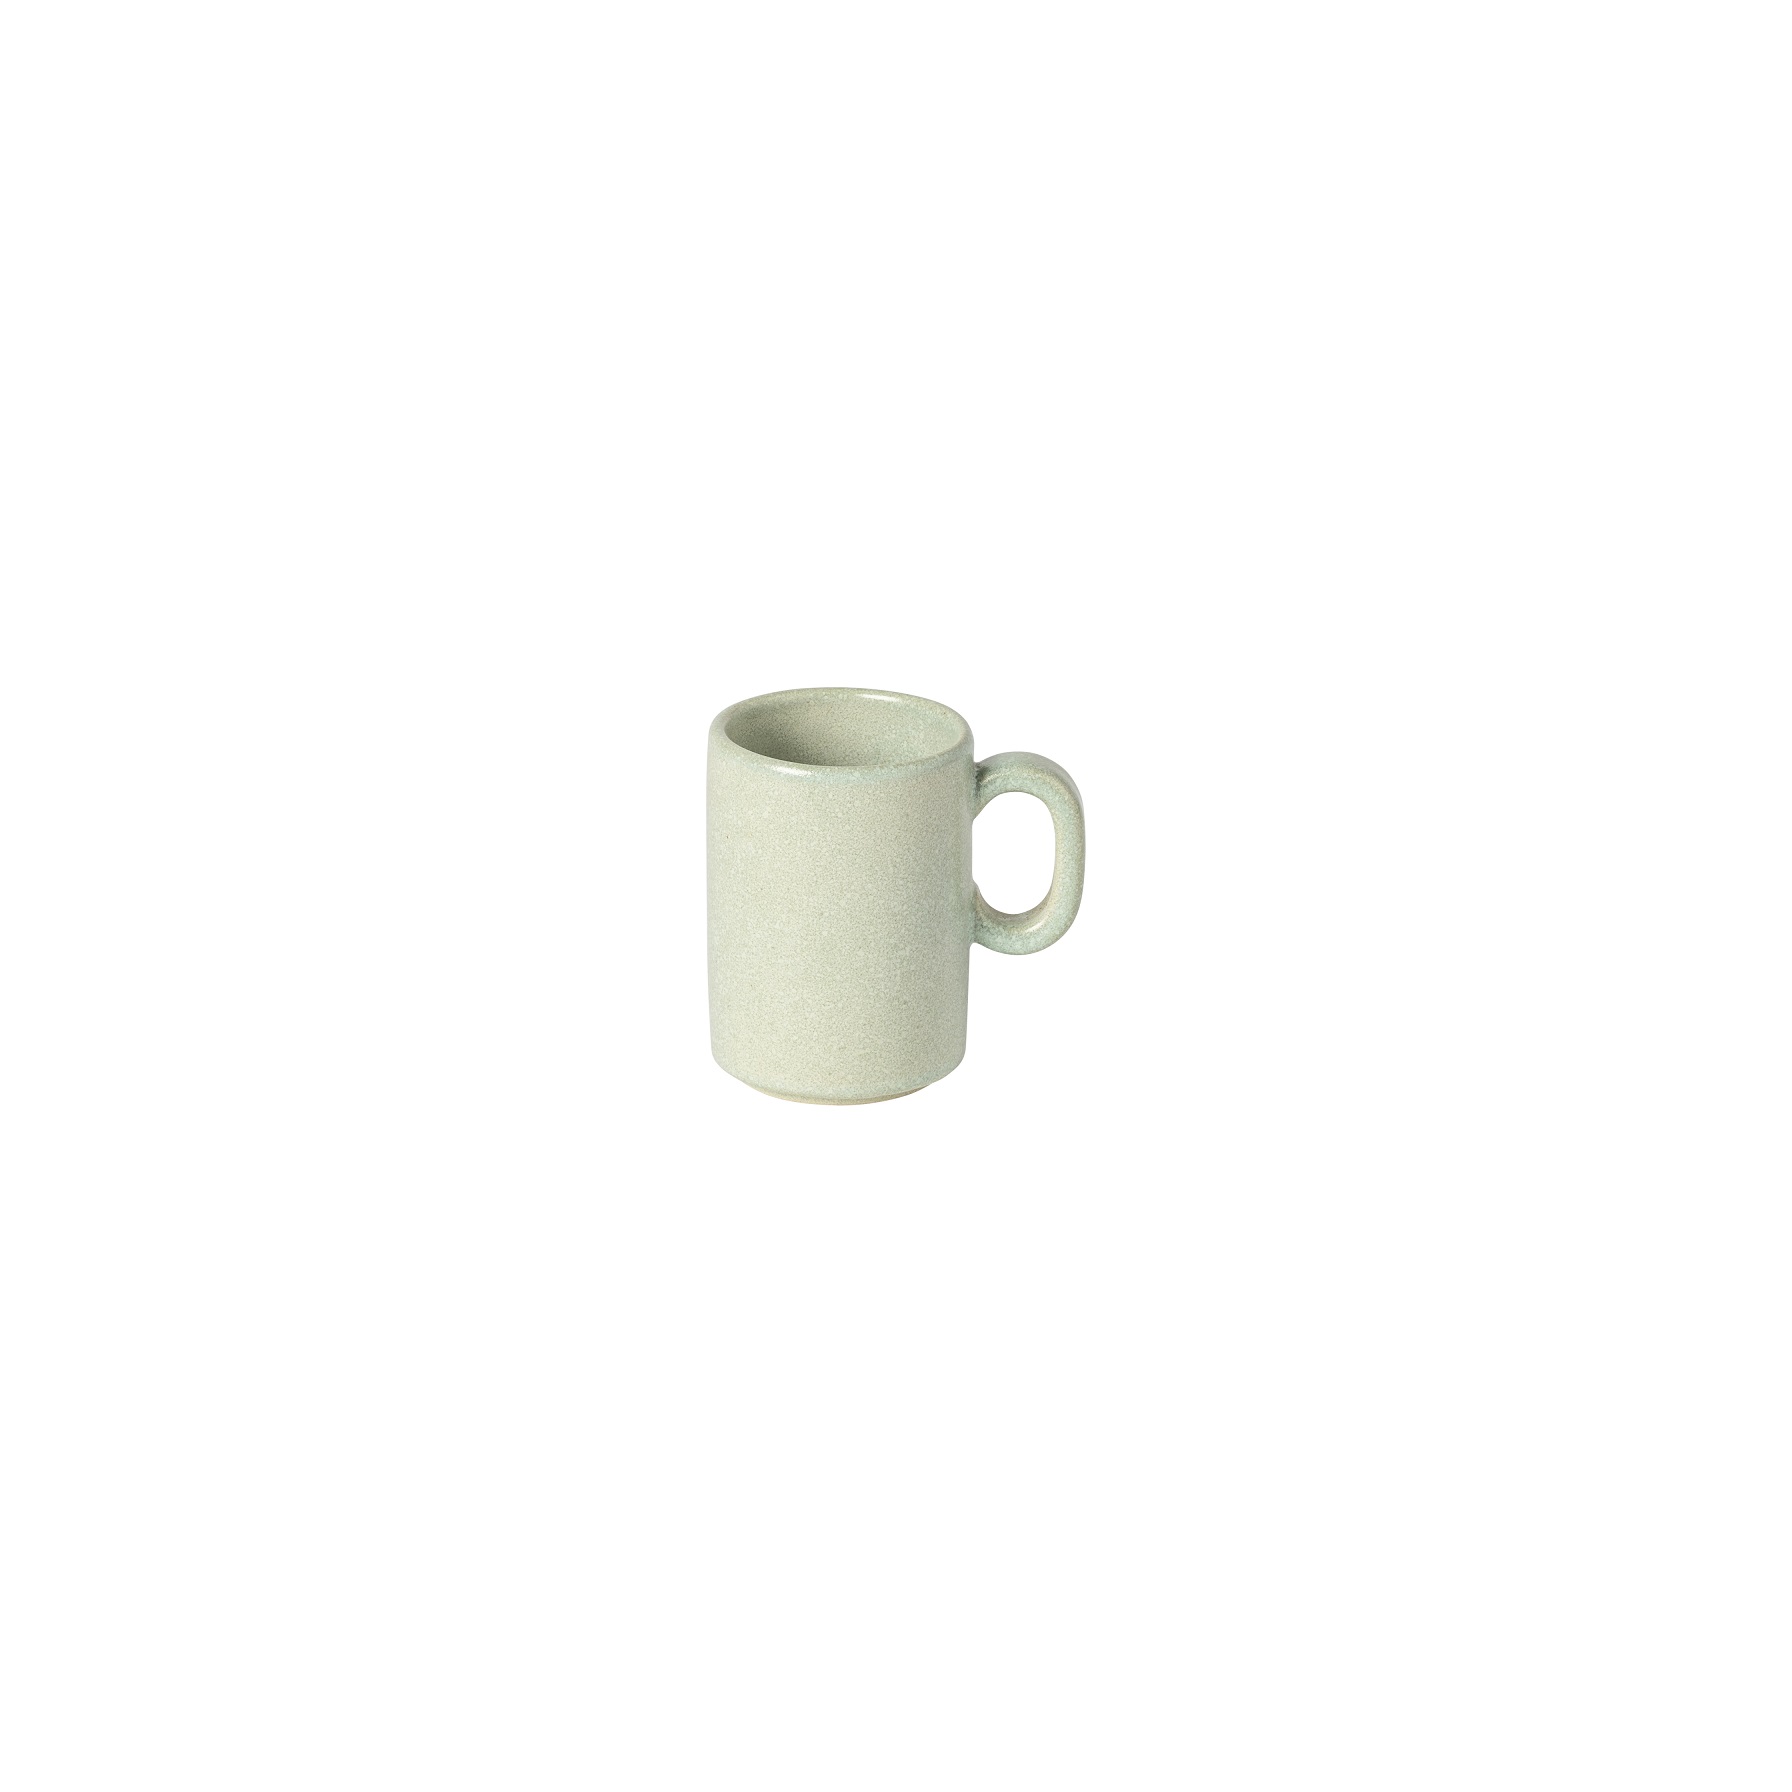 Redonda Bay Leaf Coffee Cup 7cl Gift